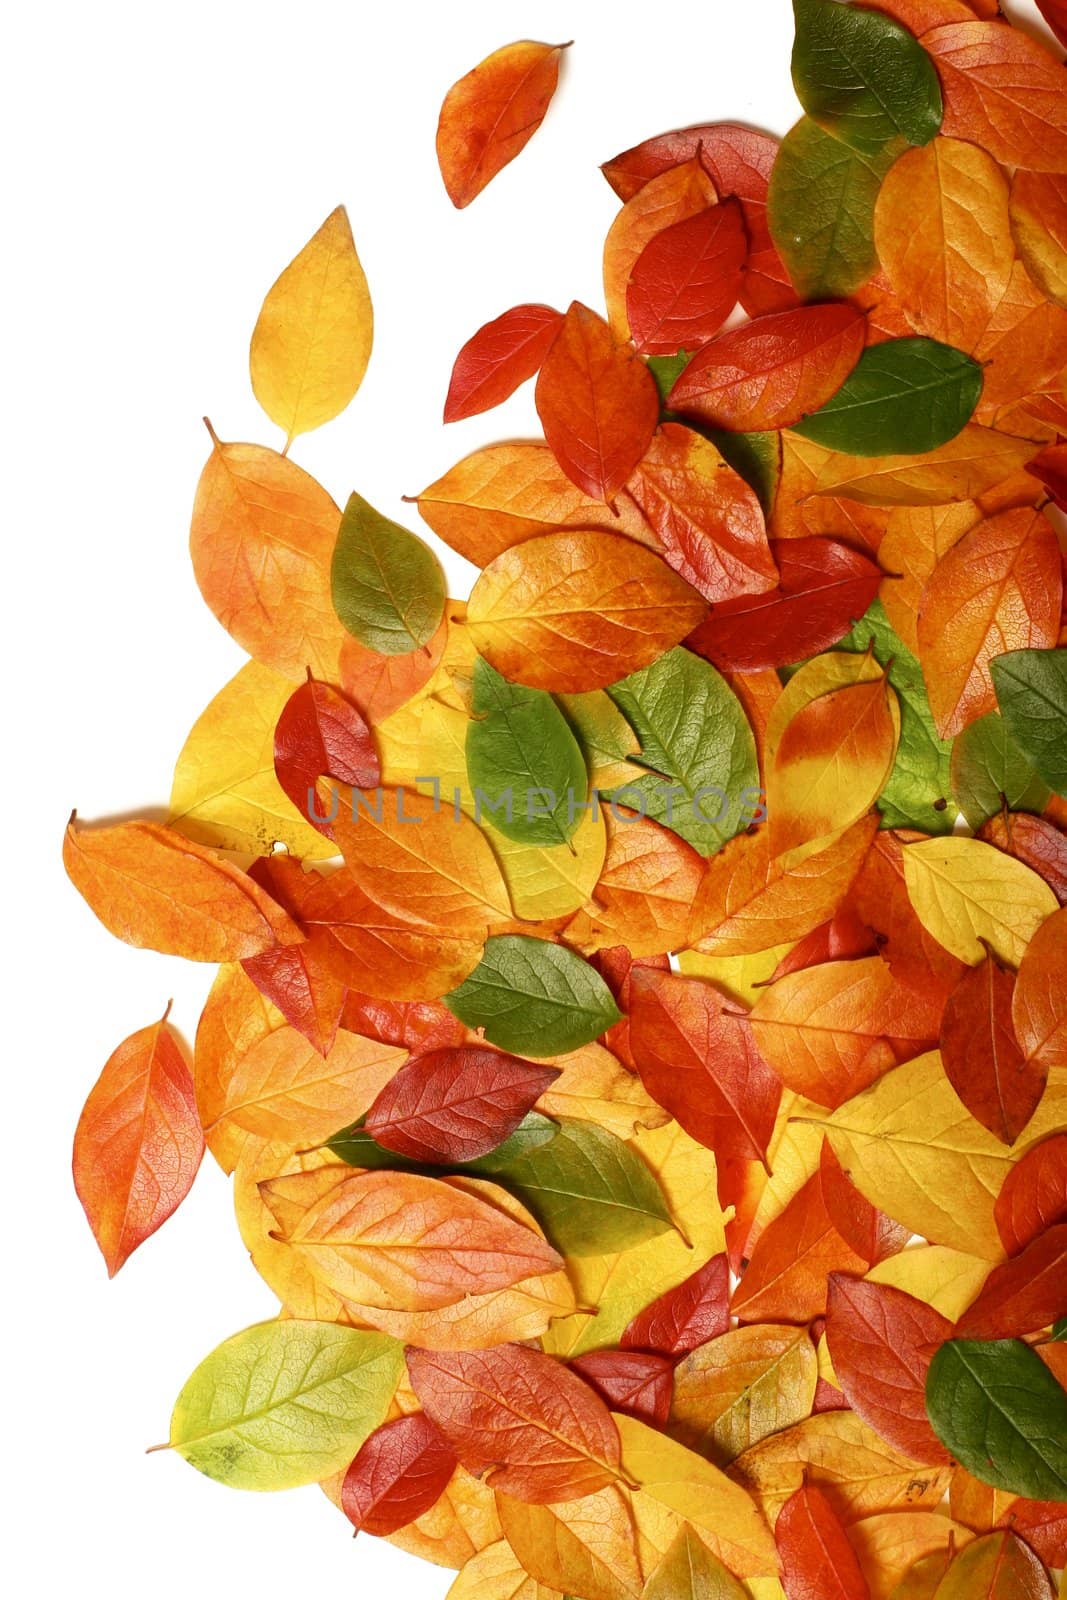 Colorful background of beautiful autumn leaves on white - perfect for seasonal usage